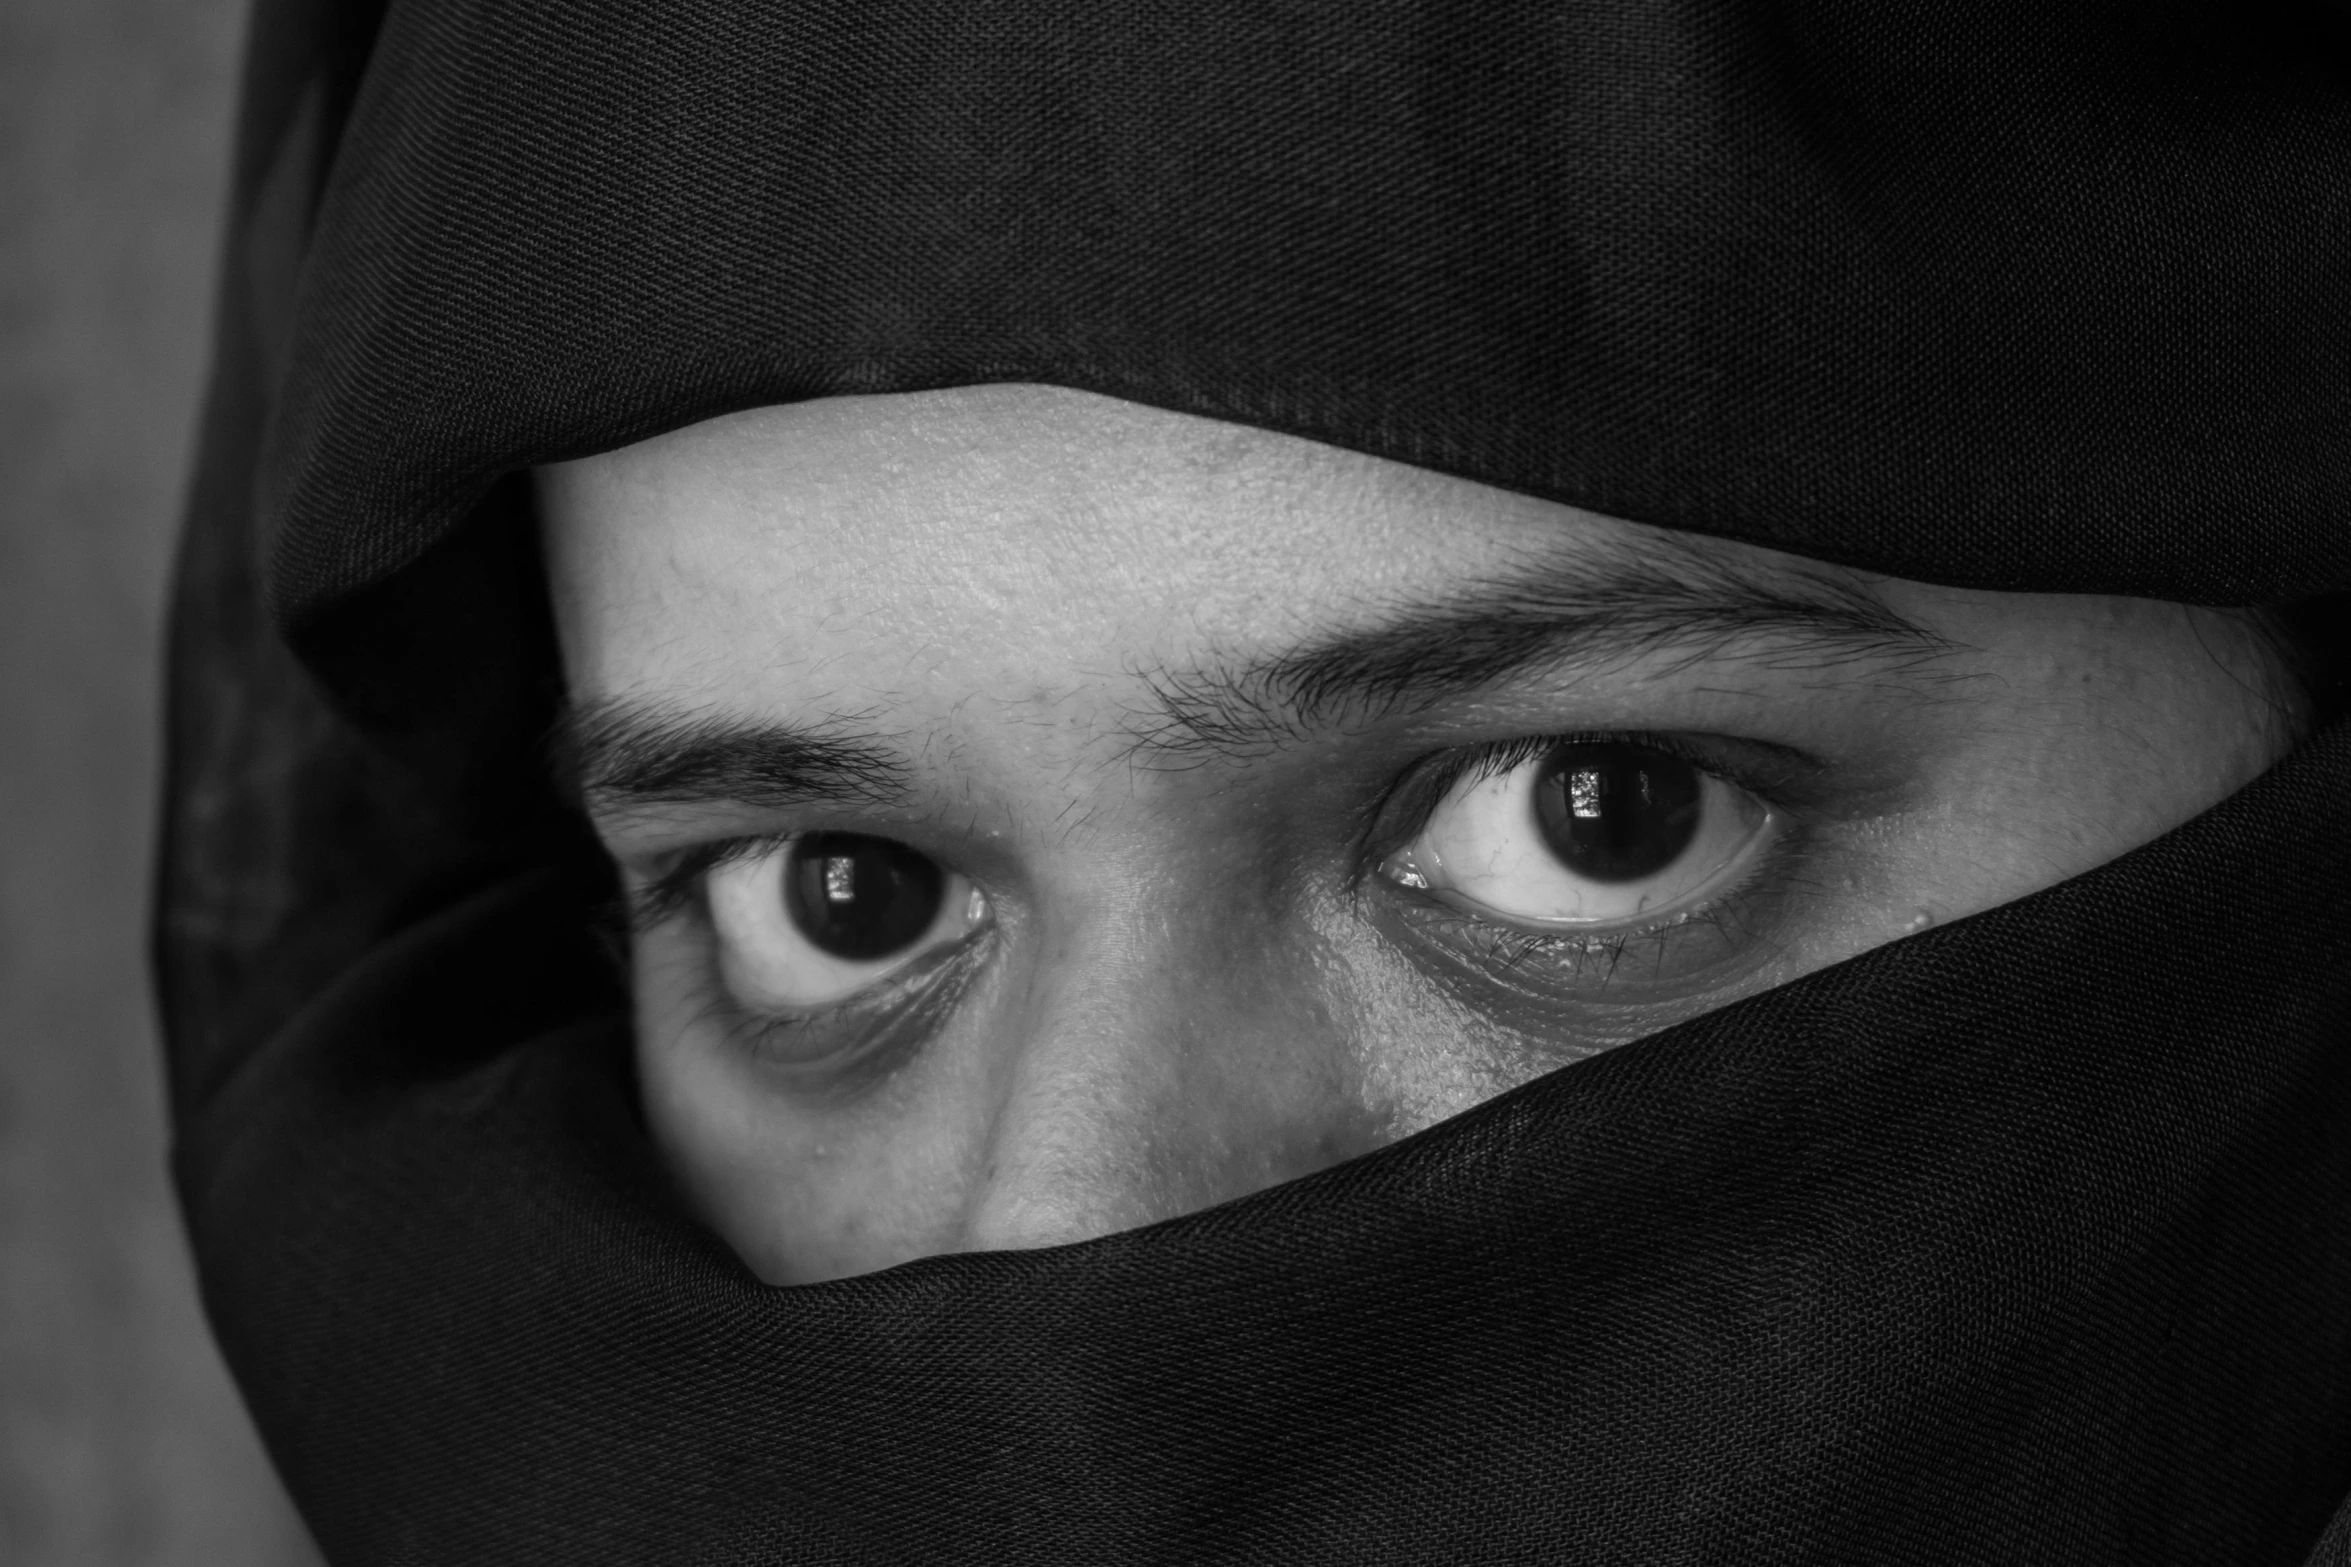 a person's eyes are partially hidden by the hood